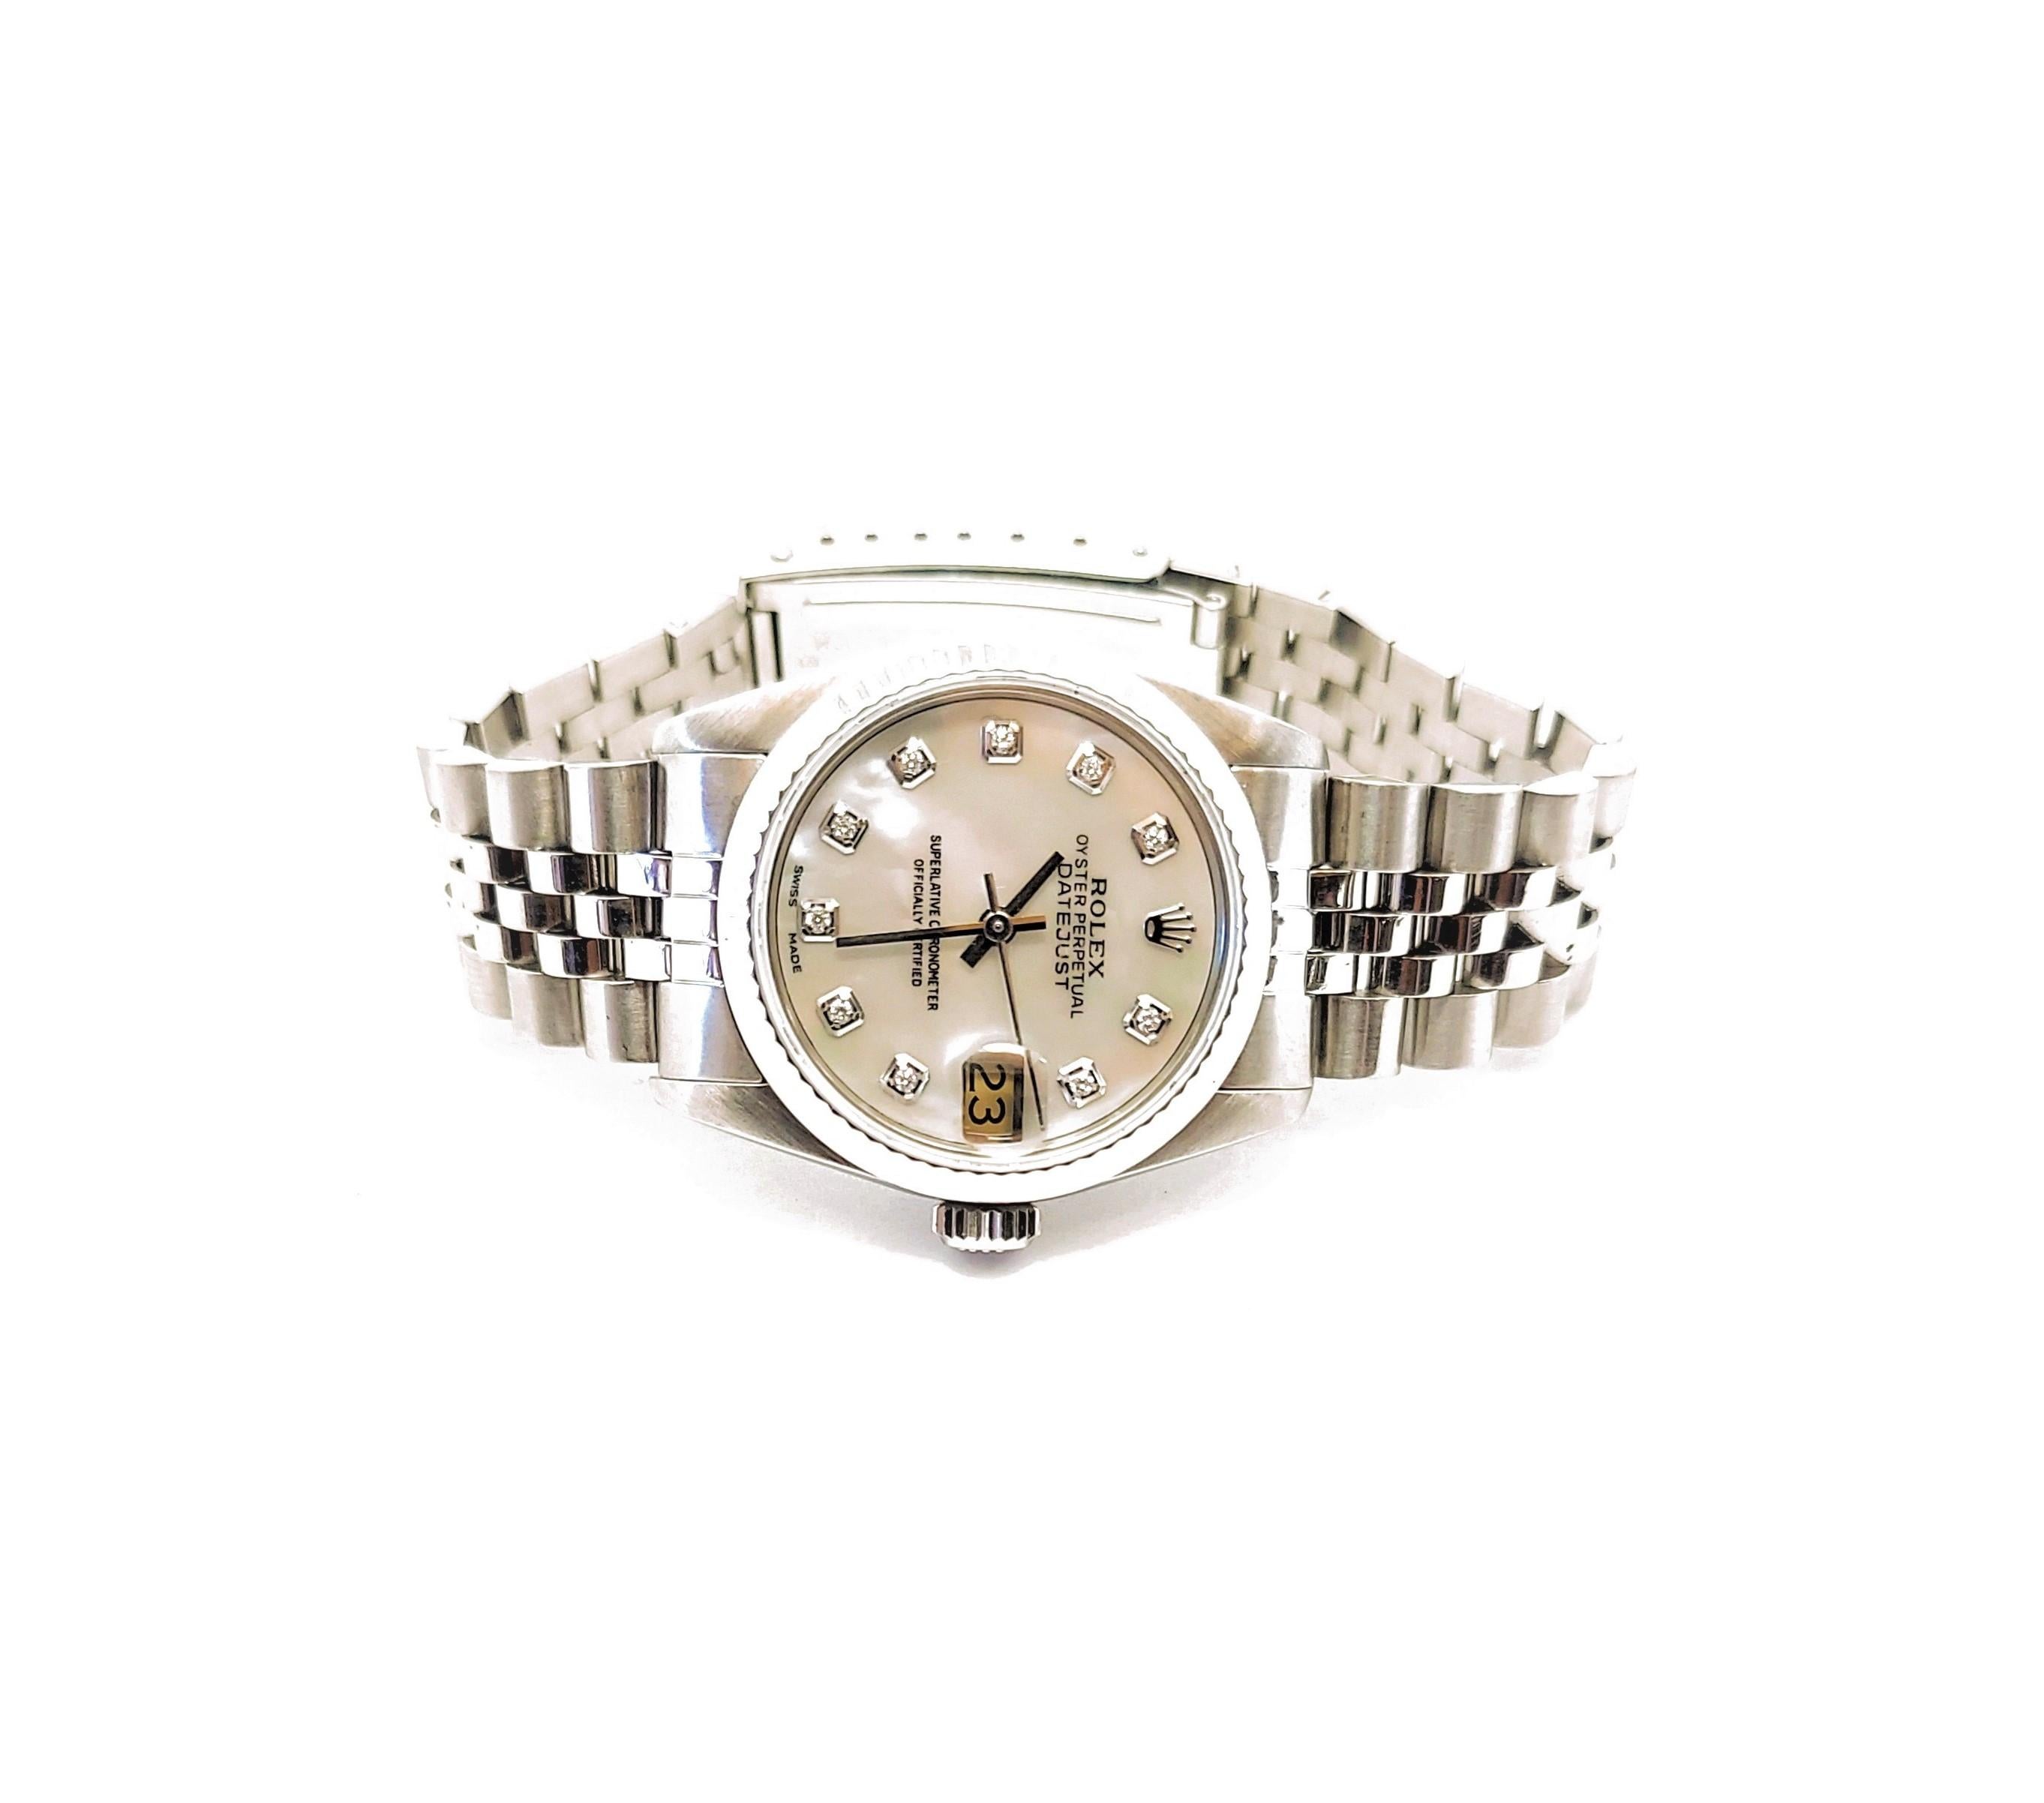 Brand - Rolex
Model - 68274 Datejust 
Case Size - 31mm 
Metals - Steel/White gold
Bezel - White Gold Fluted
Crystal - Sapphire
Dial - MOP Diamond
Movement - Rolex CAL.2135
Wrist Band - Stainless Steel Jubilee
Wrist Size - 7 inches 

3 YEAR IN HOUSE